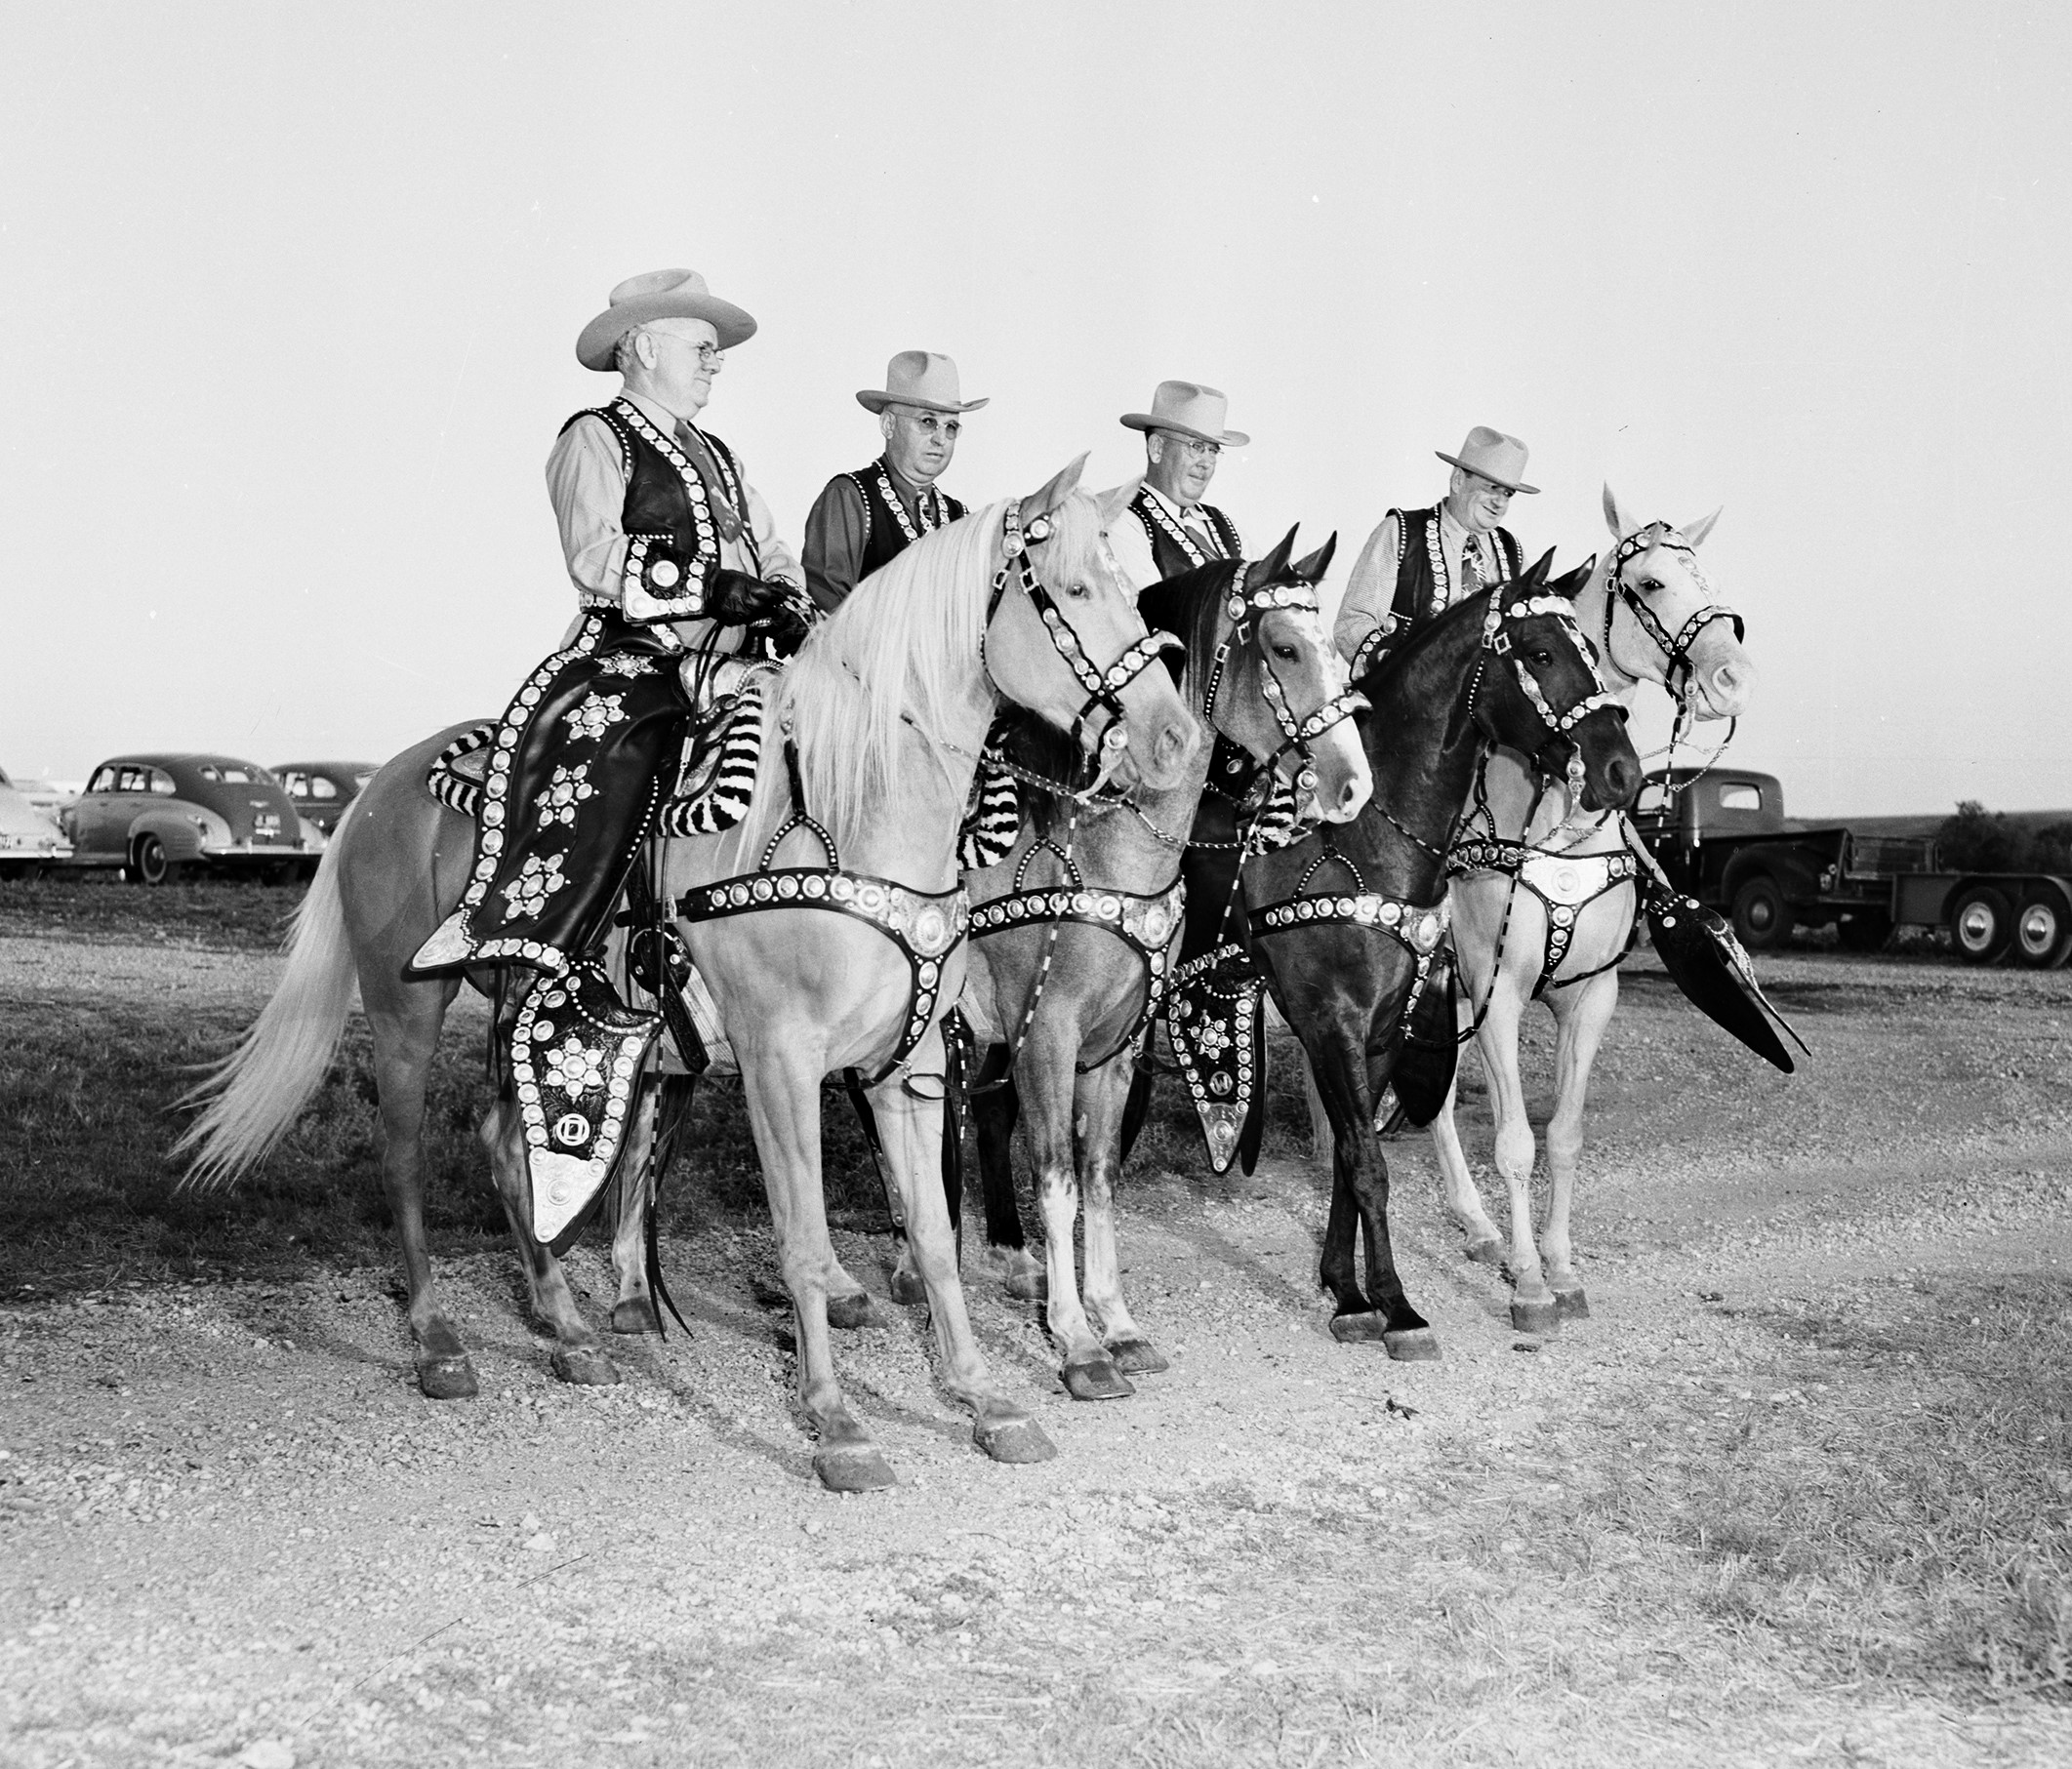 Four men in a row mounted on horses decked out in leather and silverwork parade gear